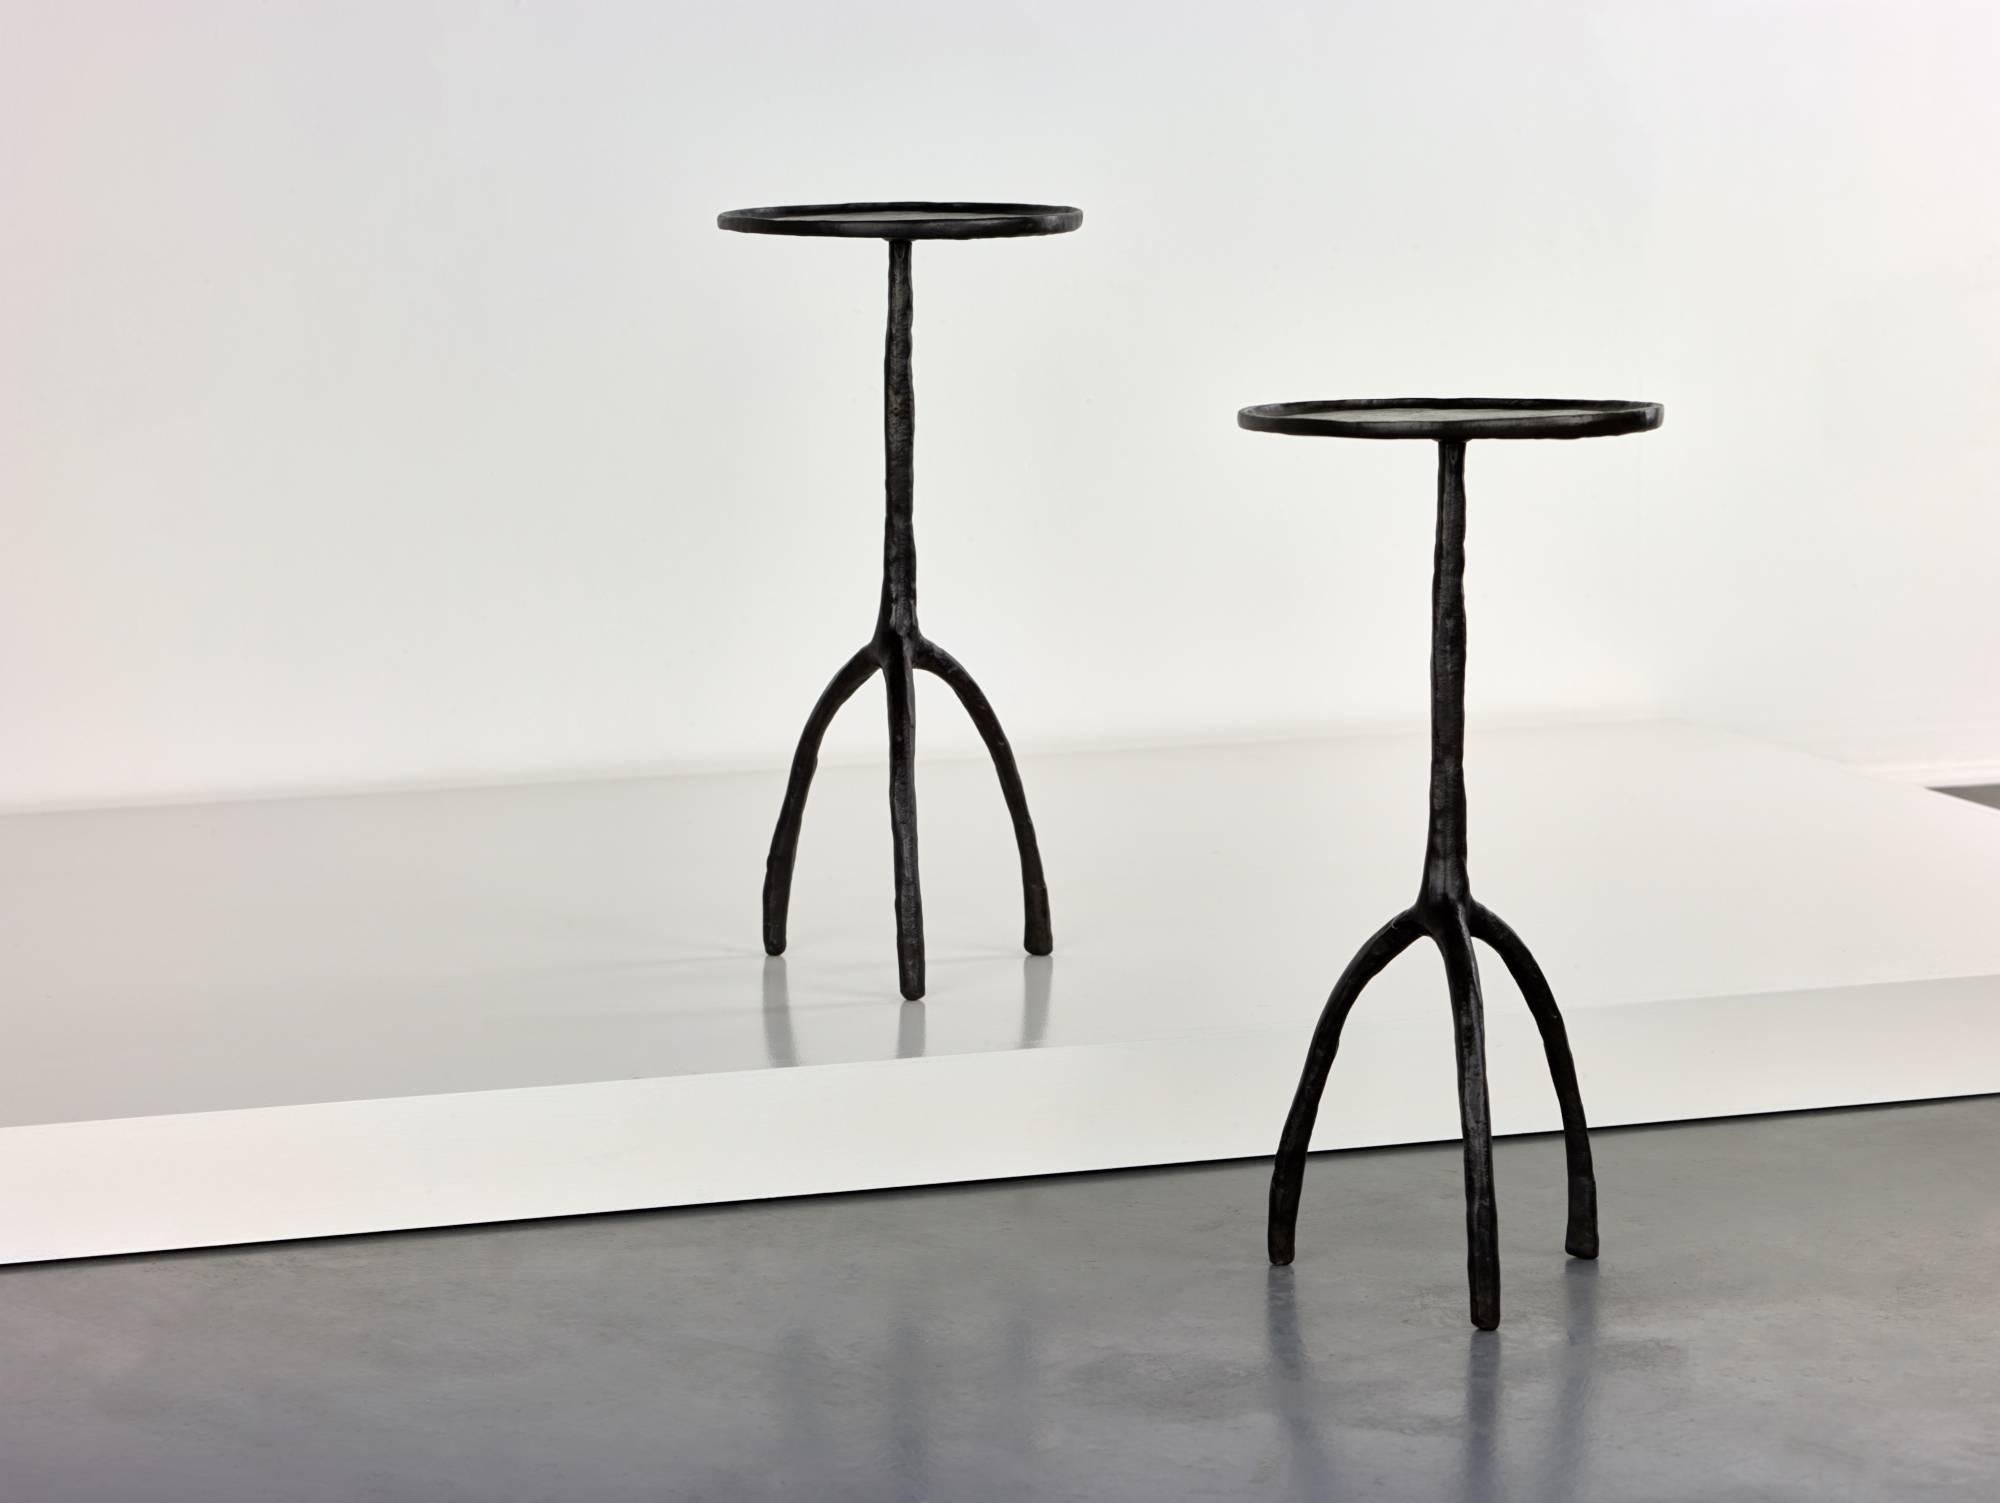 Cast bronze occasional tables by Christian Liaigre,

USA, circa 2000.
Cast bronze.

Signed with manufacture's mark to the base [CL].

Measure: 27 x 57 cm.